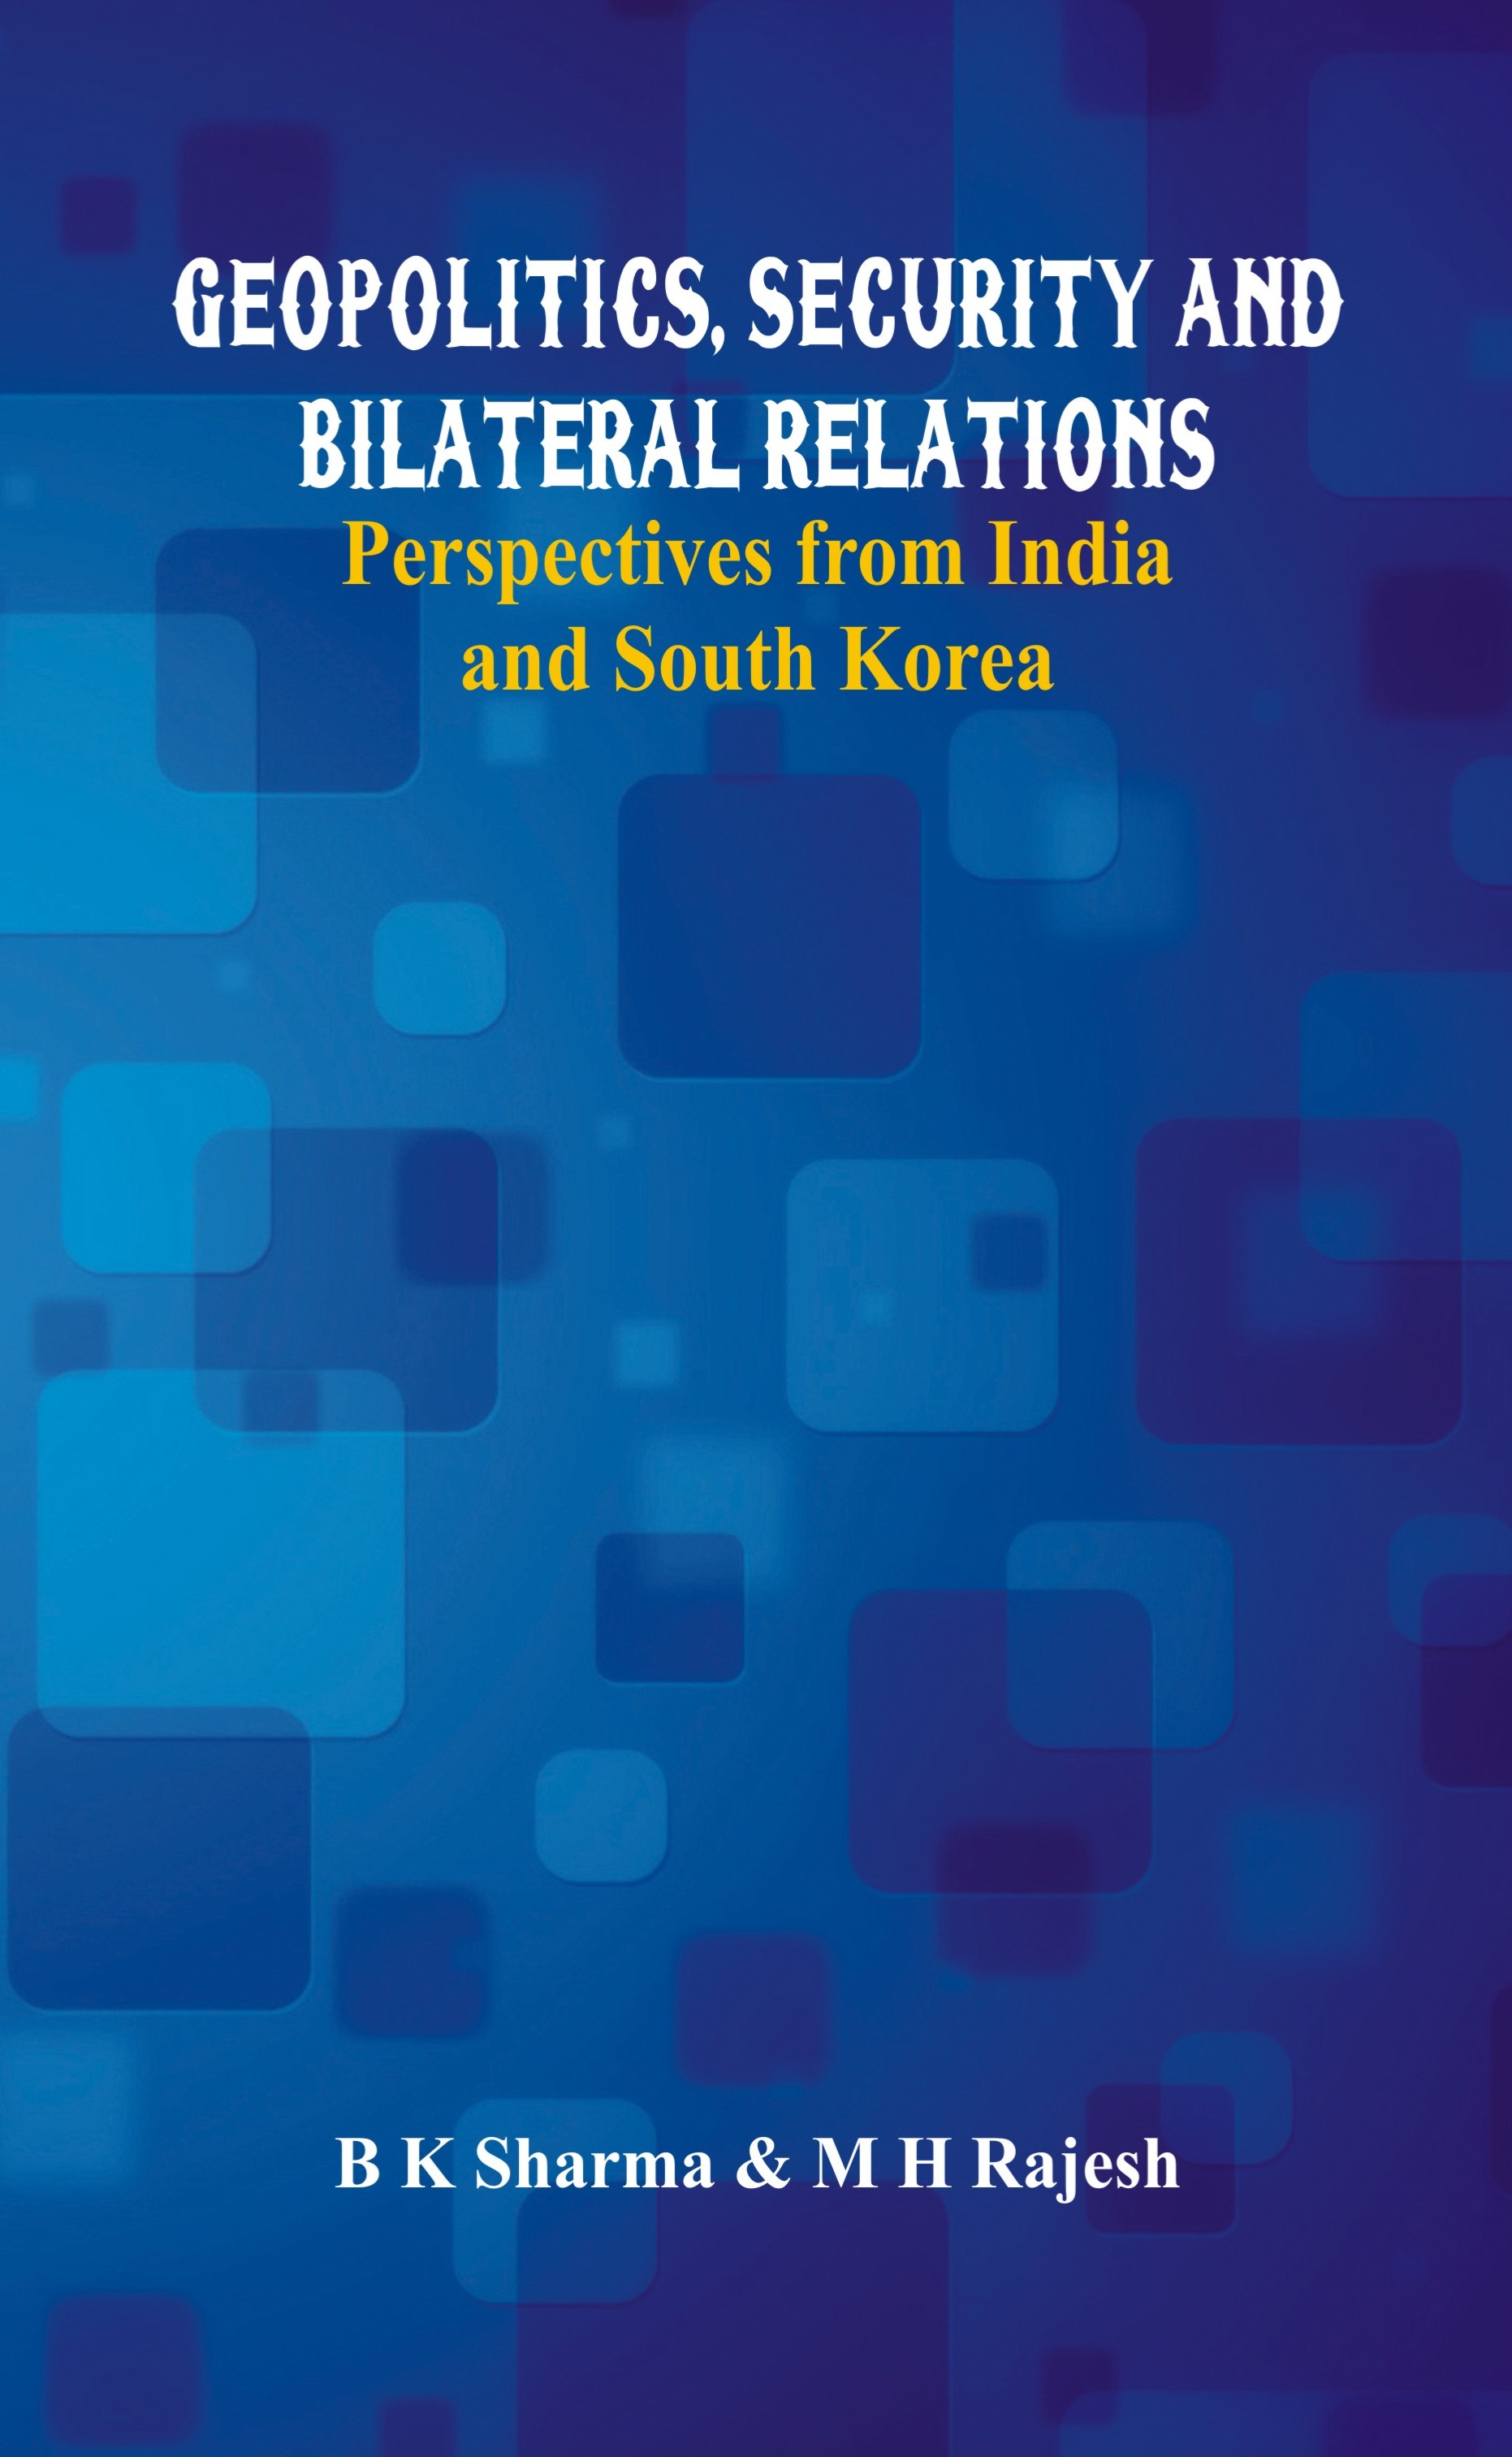 Geopolitics, Security and Bilateral Relations- Perspectives from India and South Korea